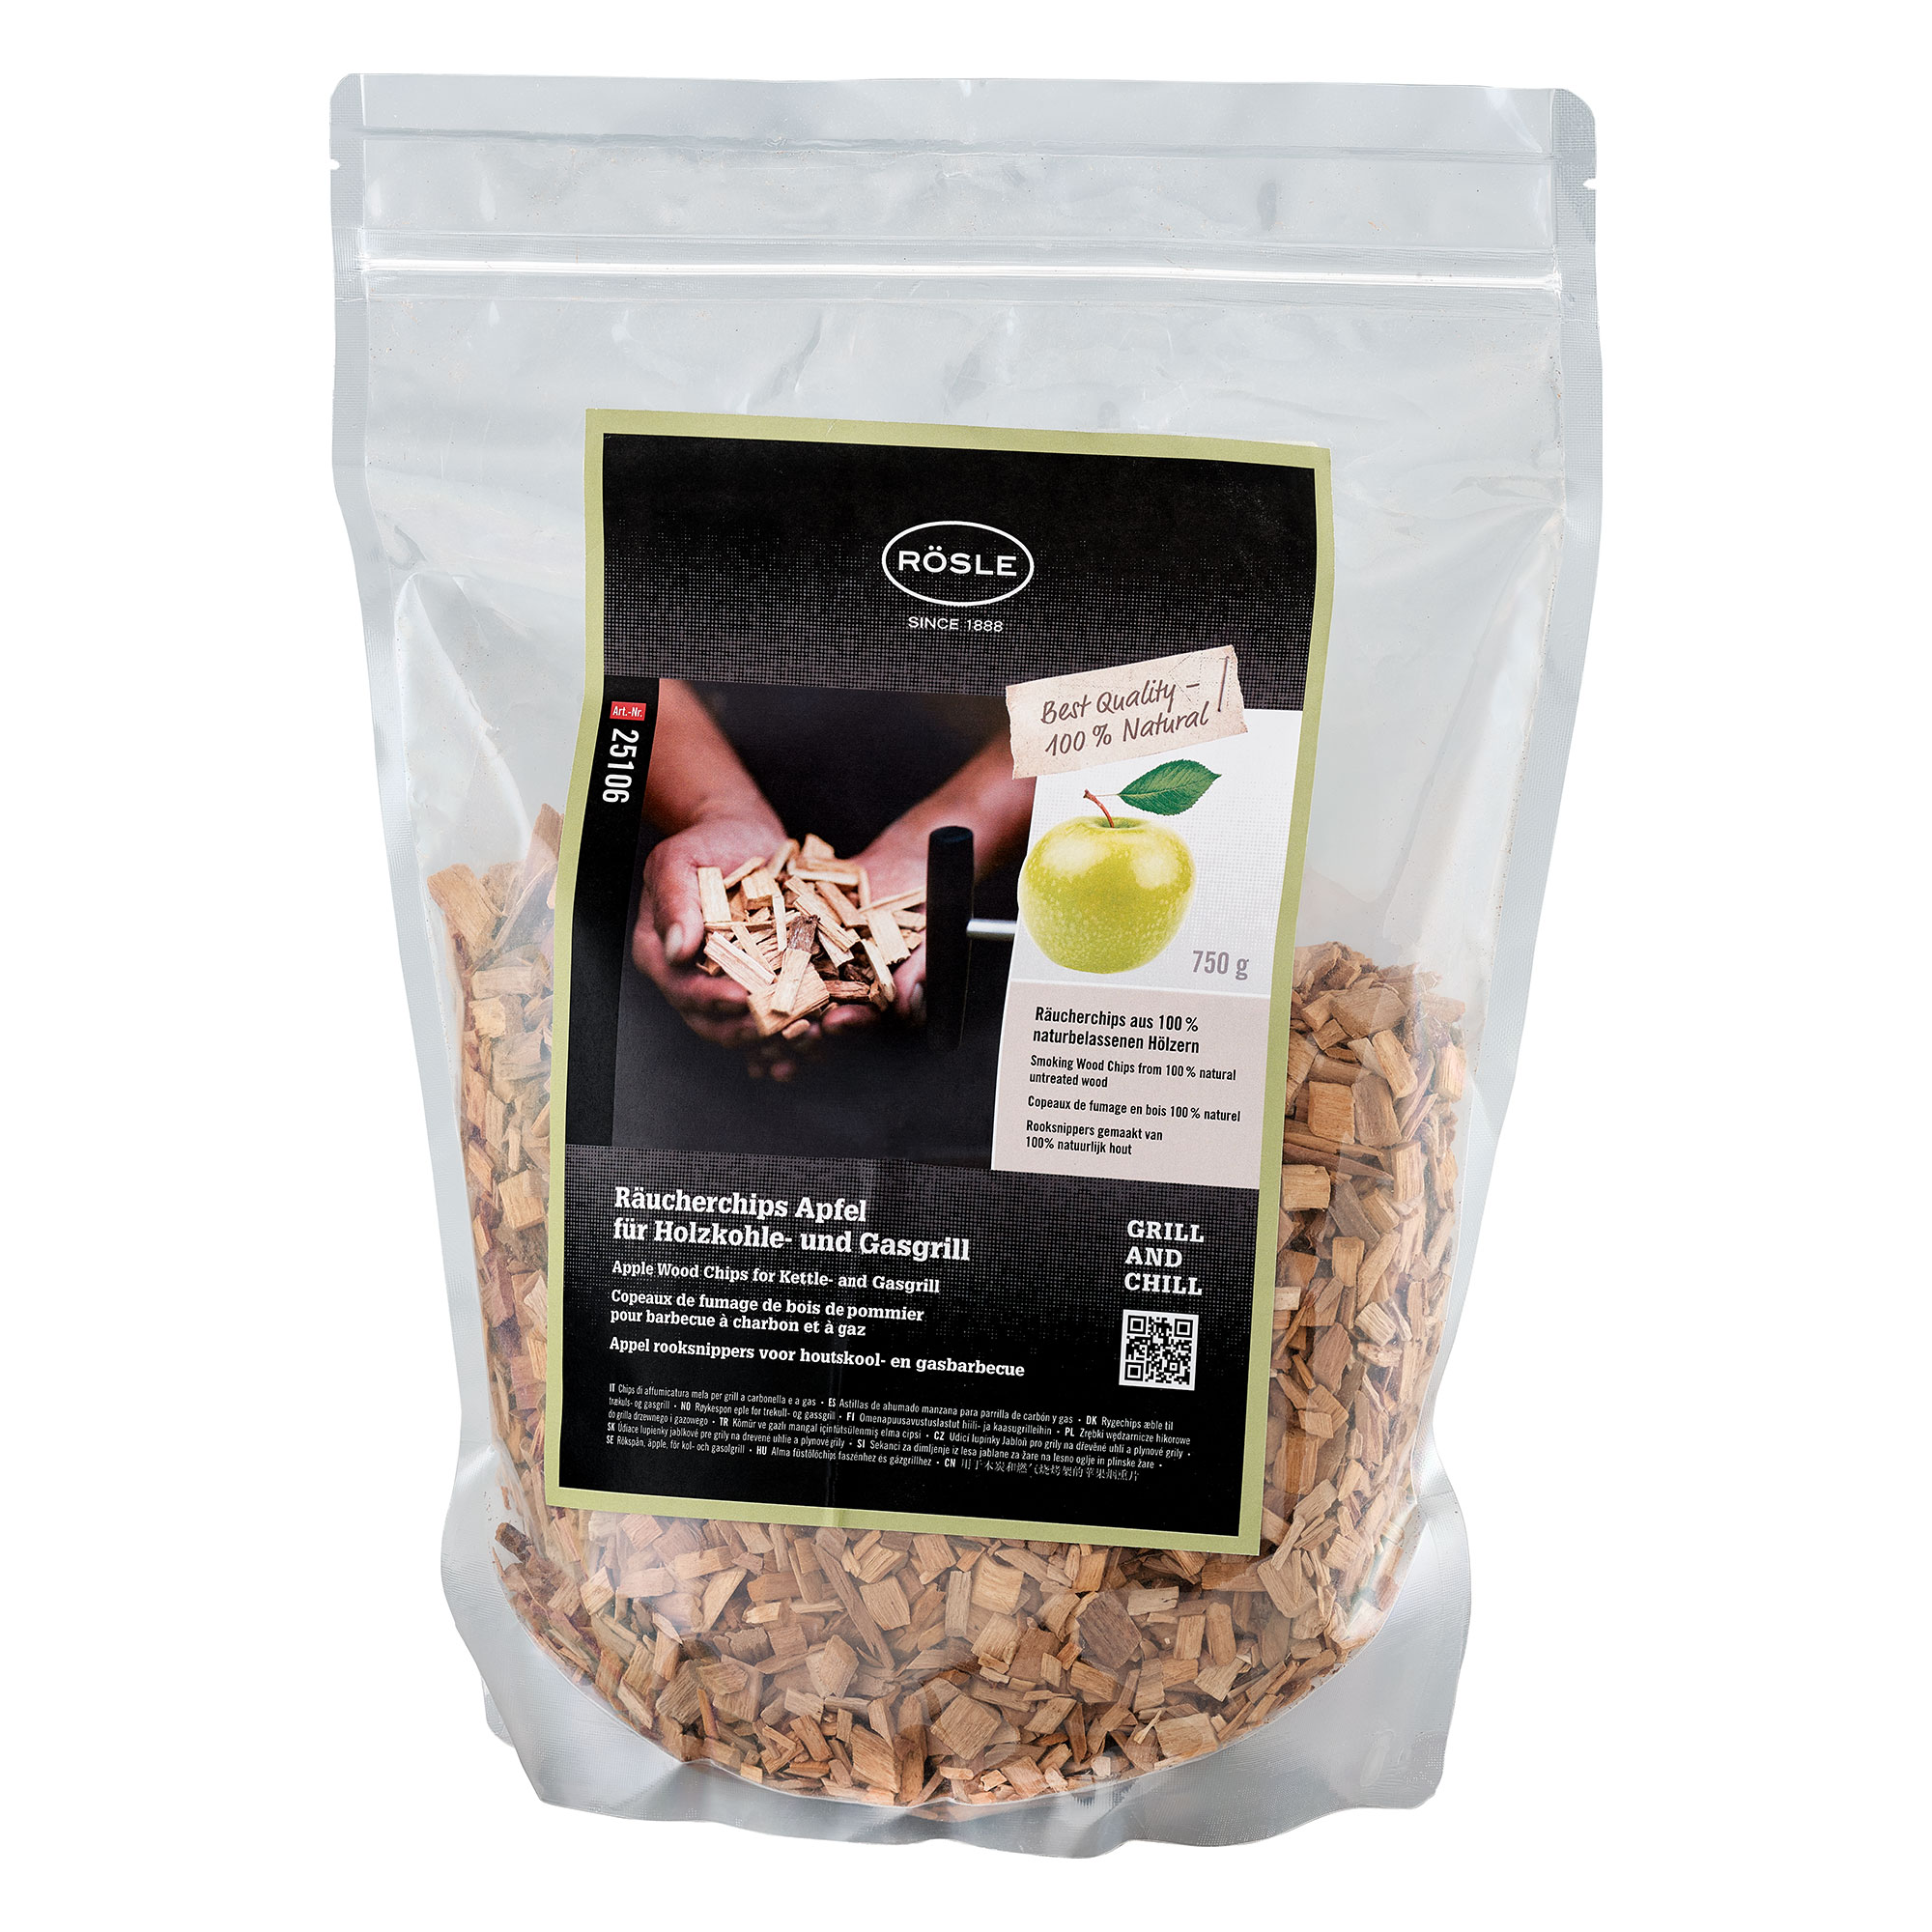 Apple Wood Chips 750 g|1.65 lbs